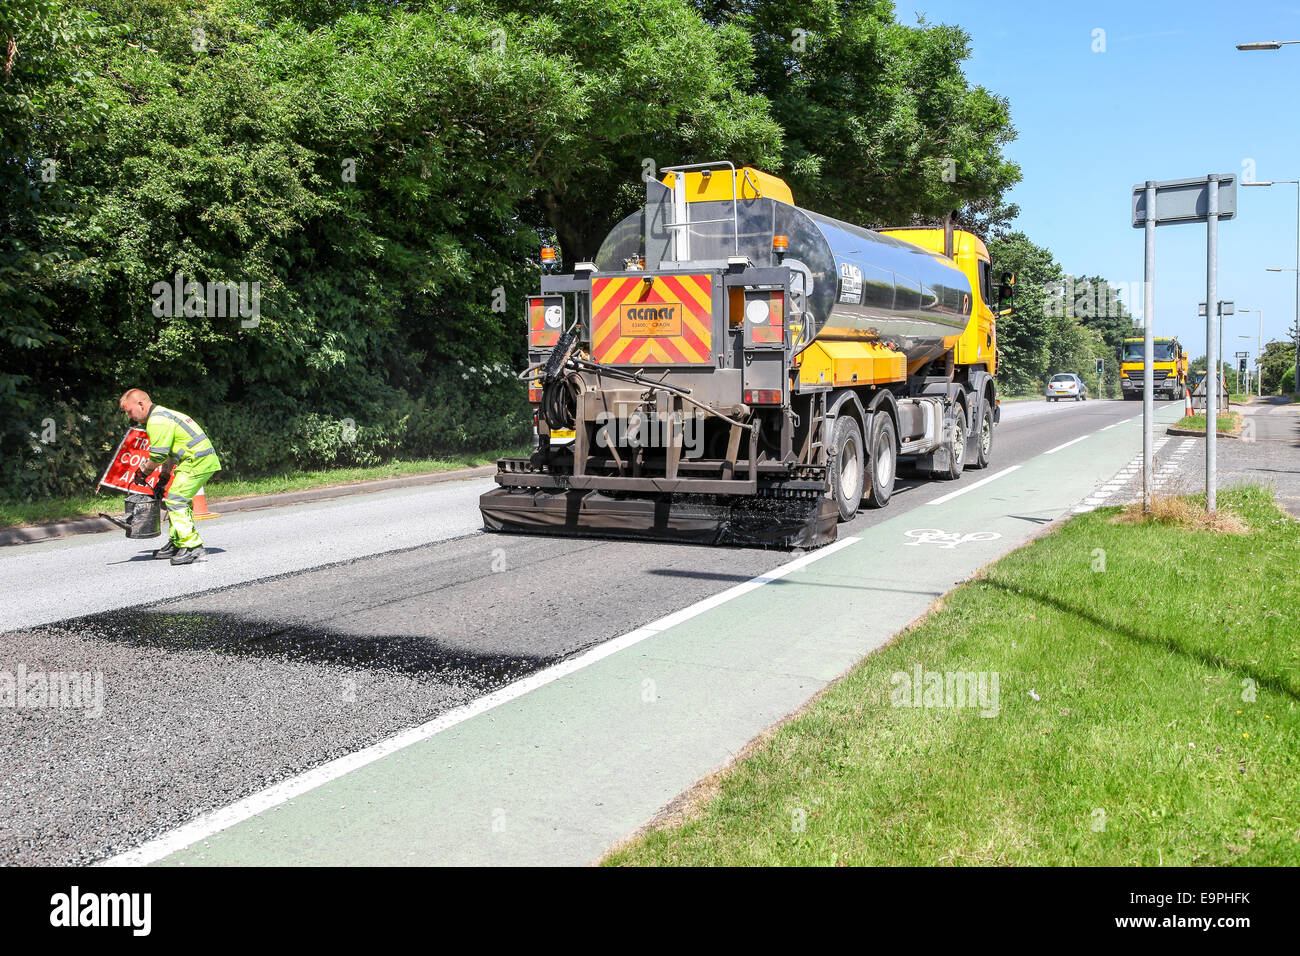 A lorry or truck tarmacing or laying tarmac on a main road Stoke-on-Trent, Staffordshire, England, UK Stock Photo